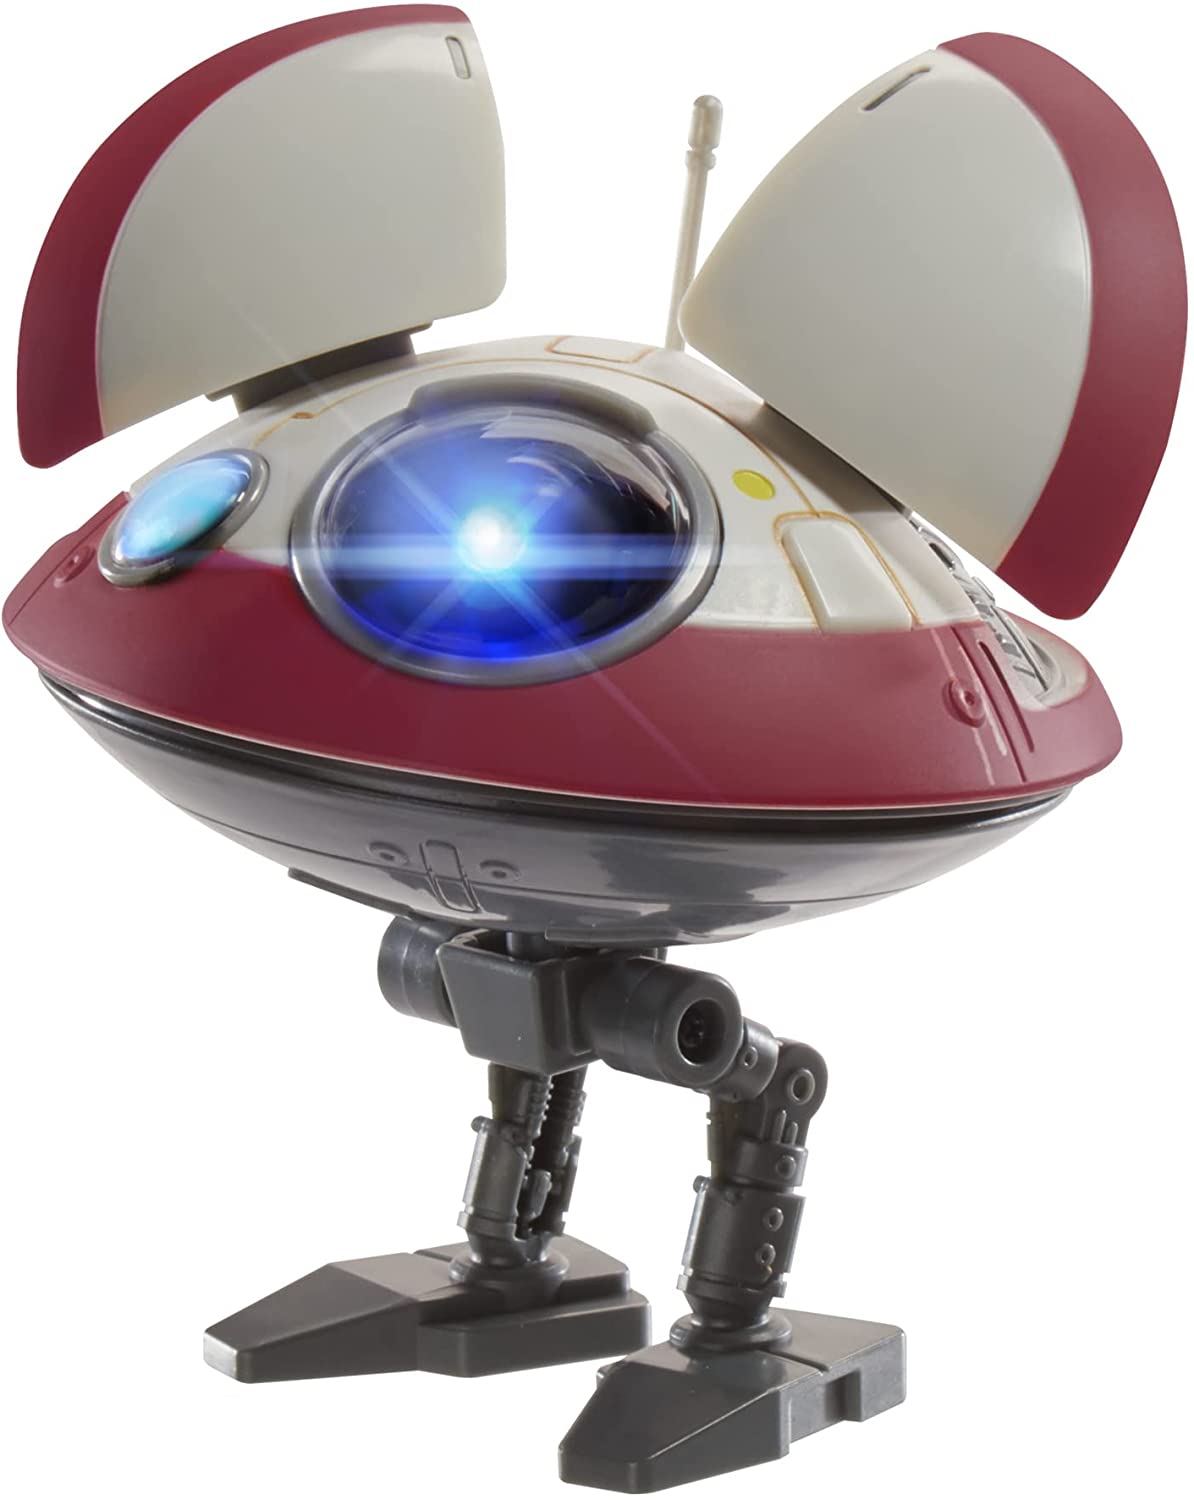 star wars geek gifts droid toy